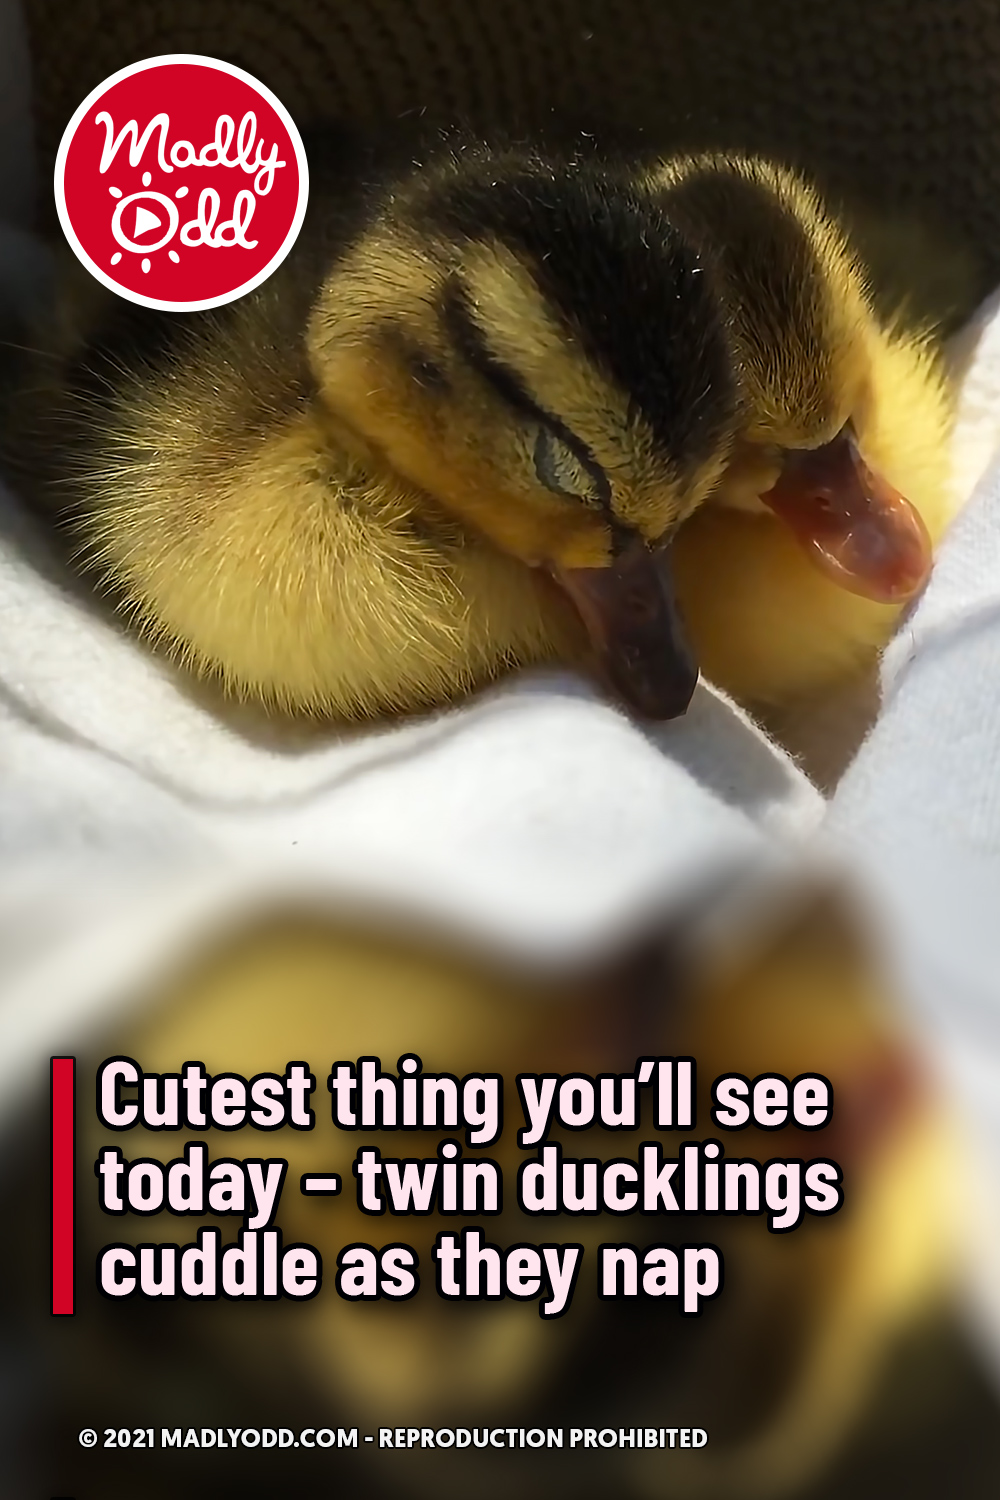 Cutest thing you’ll see today – twin ducklings cuddle as they nap